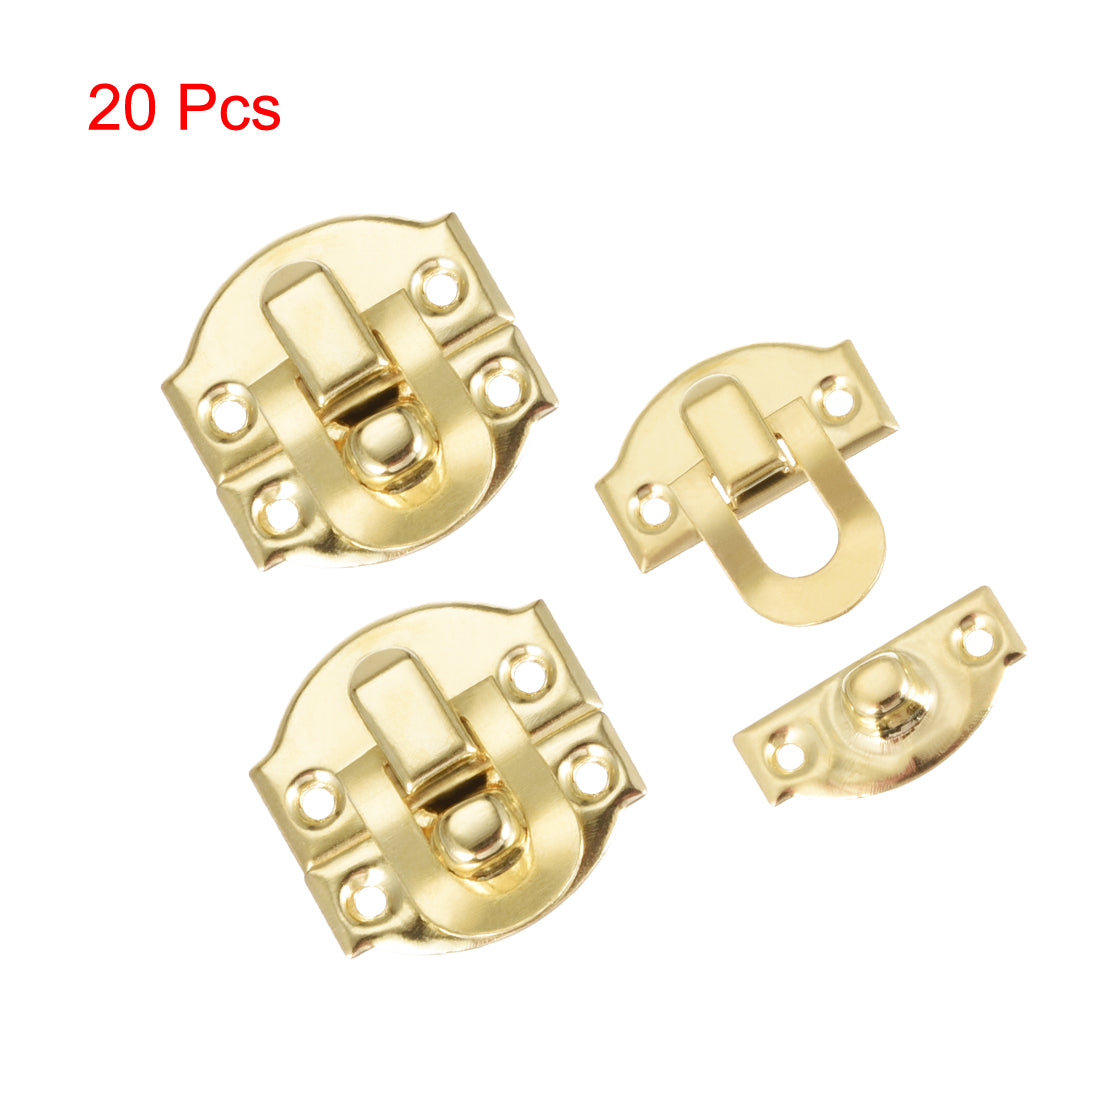 uxcell Uxcell Box Latch, 21 x 20mm Retro Style Small Size Golden Decorative Hasp Jewelry cases Catch w Screws 20 pcs